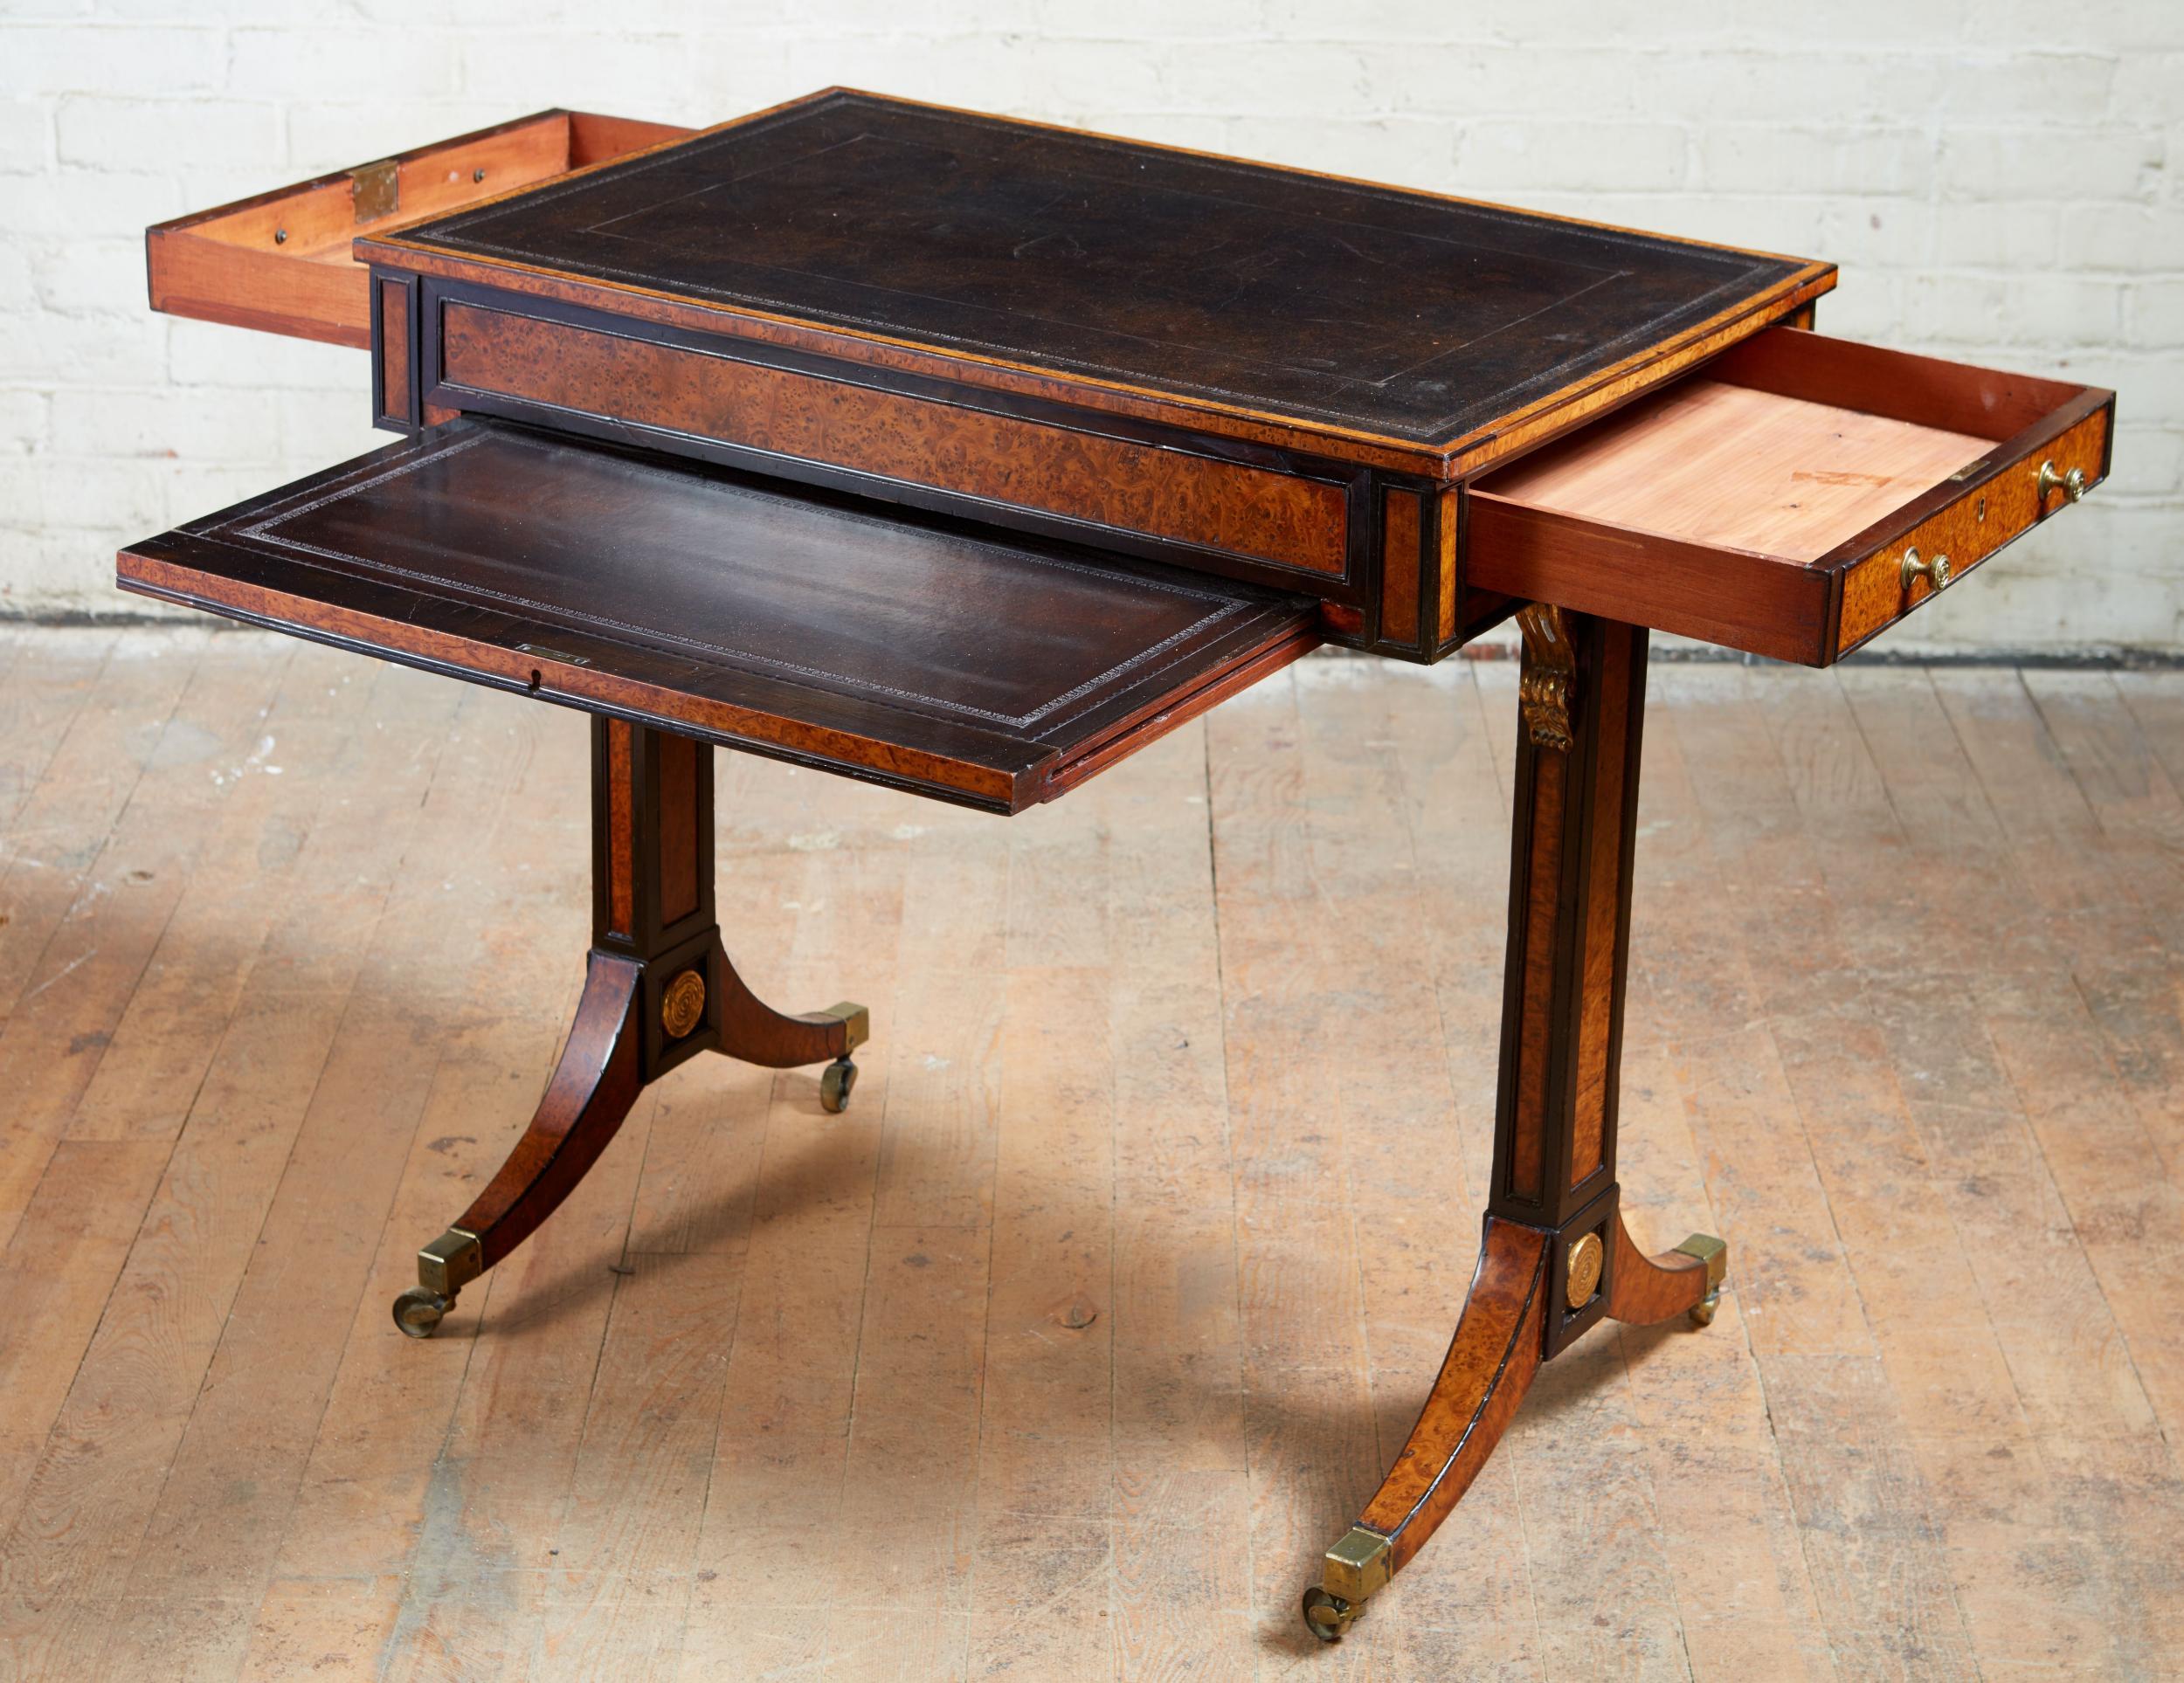 Fine Regency period burr oak and ebony writing table in the manner of George Bullock, the leather lined top with gilt tooling and burr oak and ebony banding, over two cedar lined drawers having ebony moldings and adjustable writing slope also with